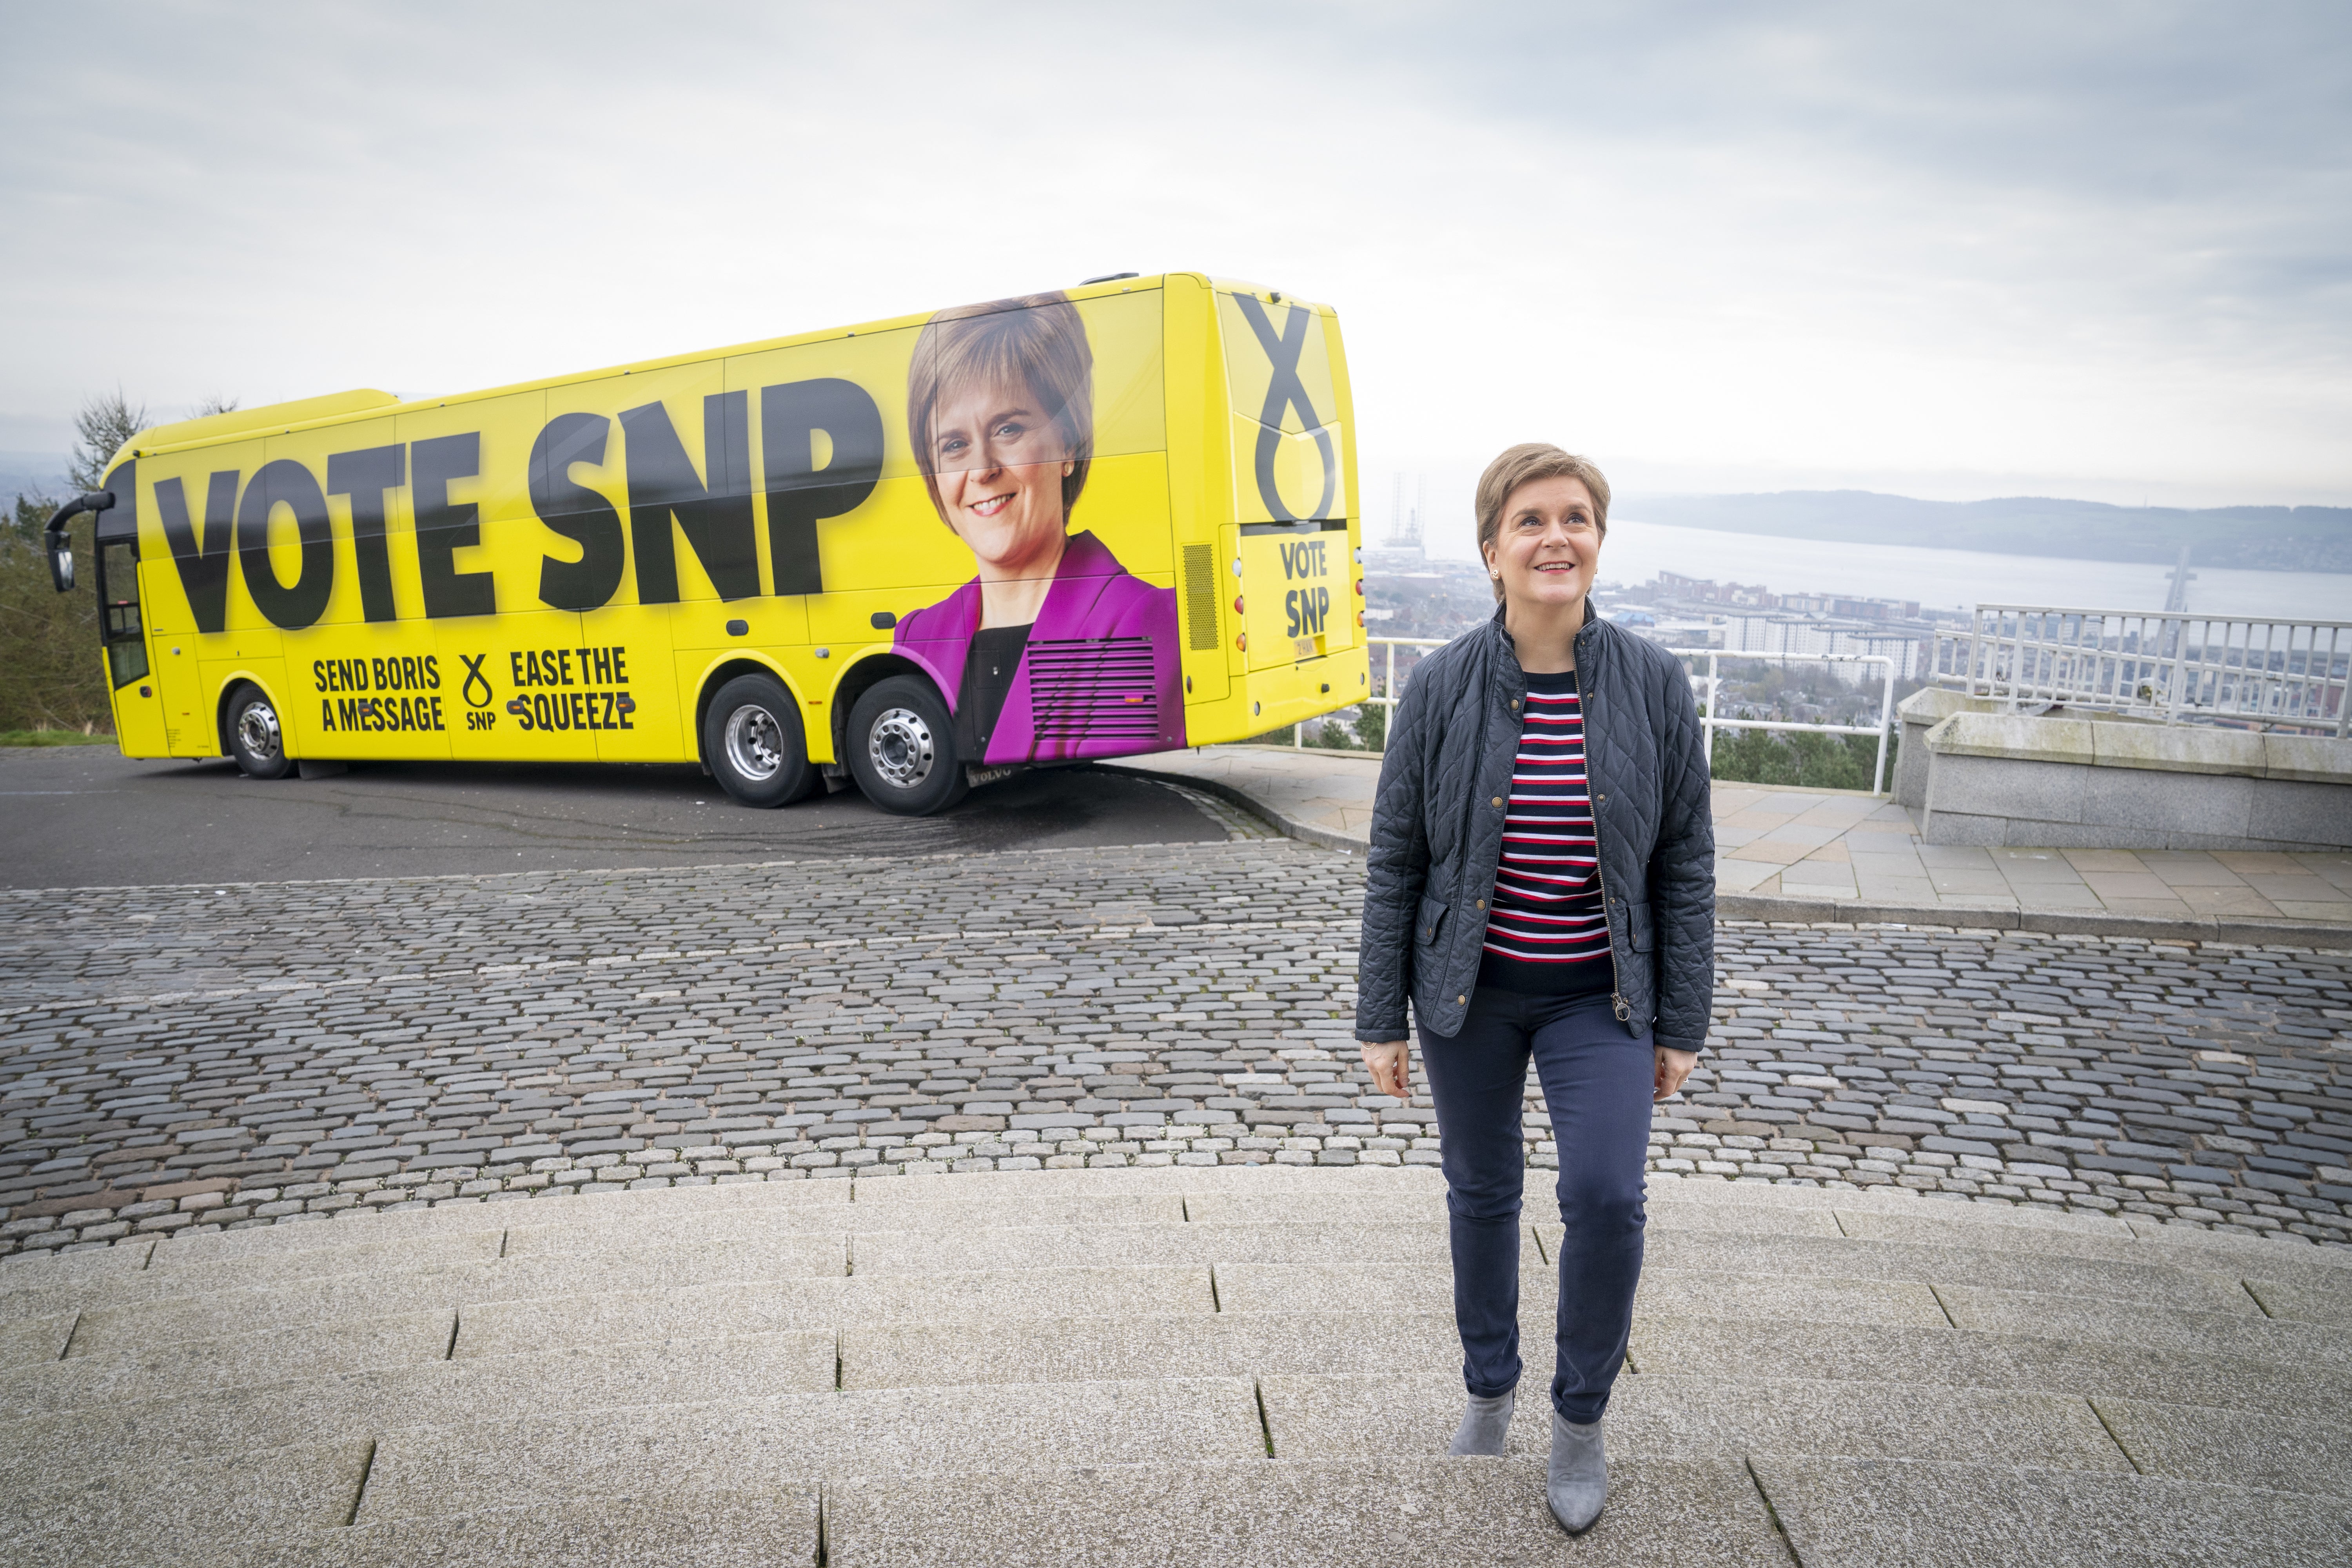 Ms Sturgeon has been on the campaign trail ahead of the council elections (Jane Barlow/PA)